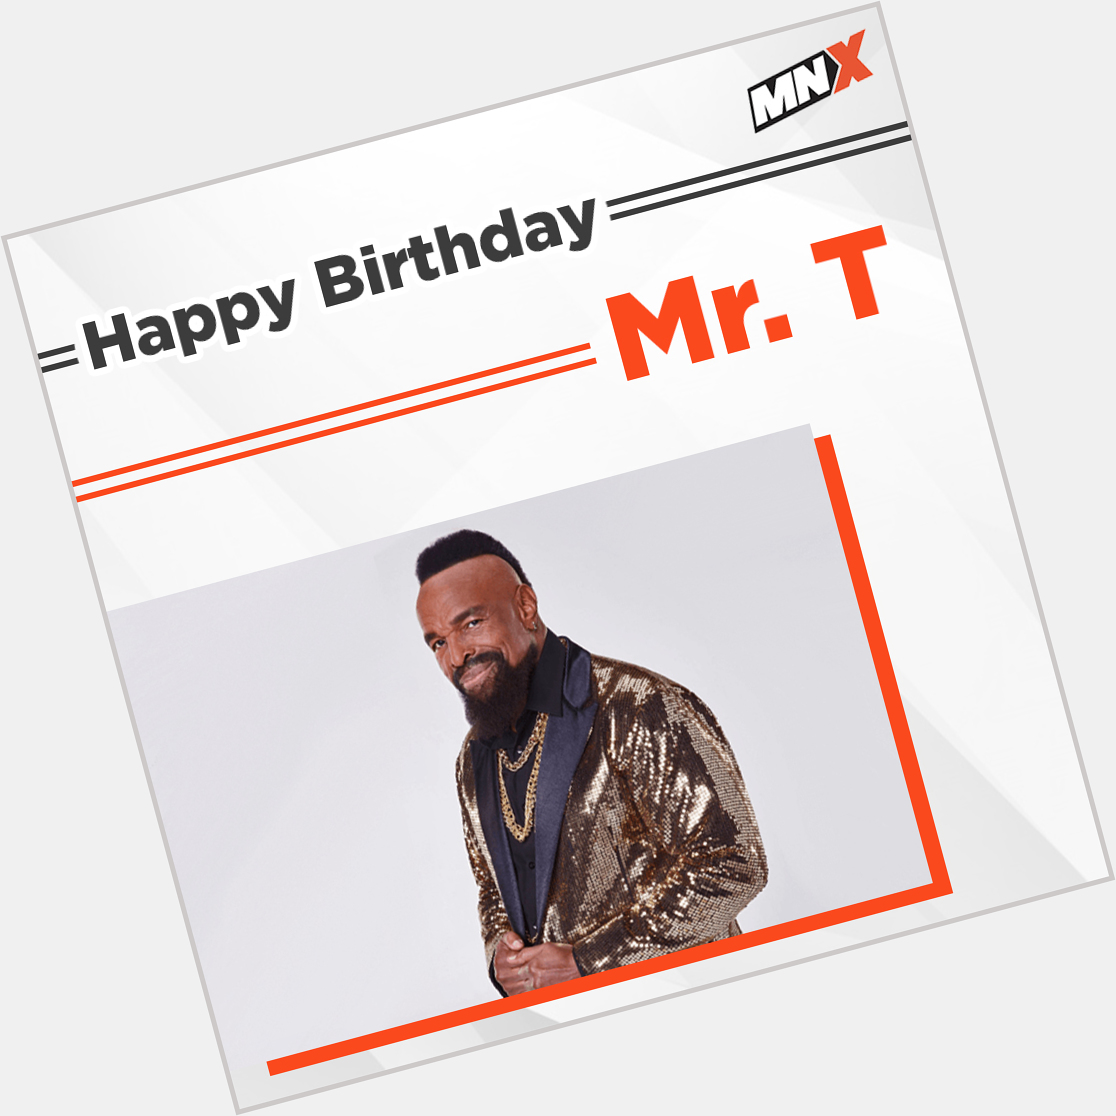 Complete this iconic line to wish Mr.T a Happy Birthday:
A: I Pity The ___!    